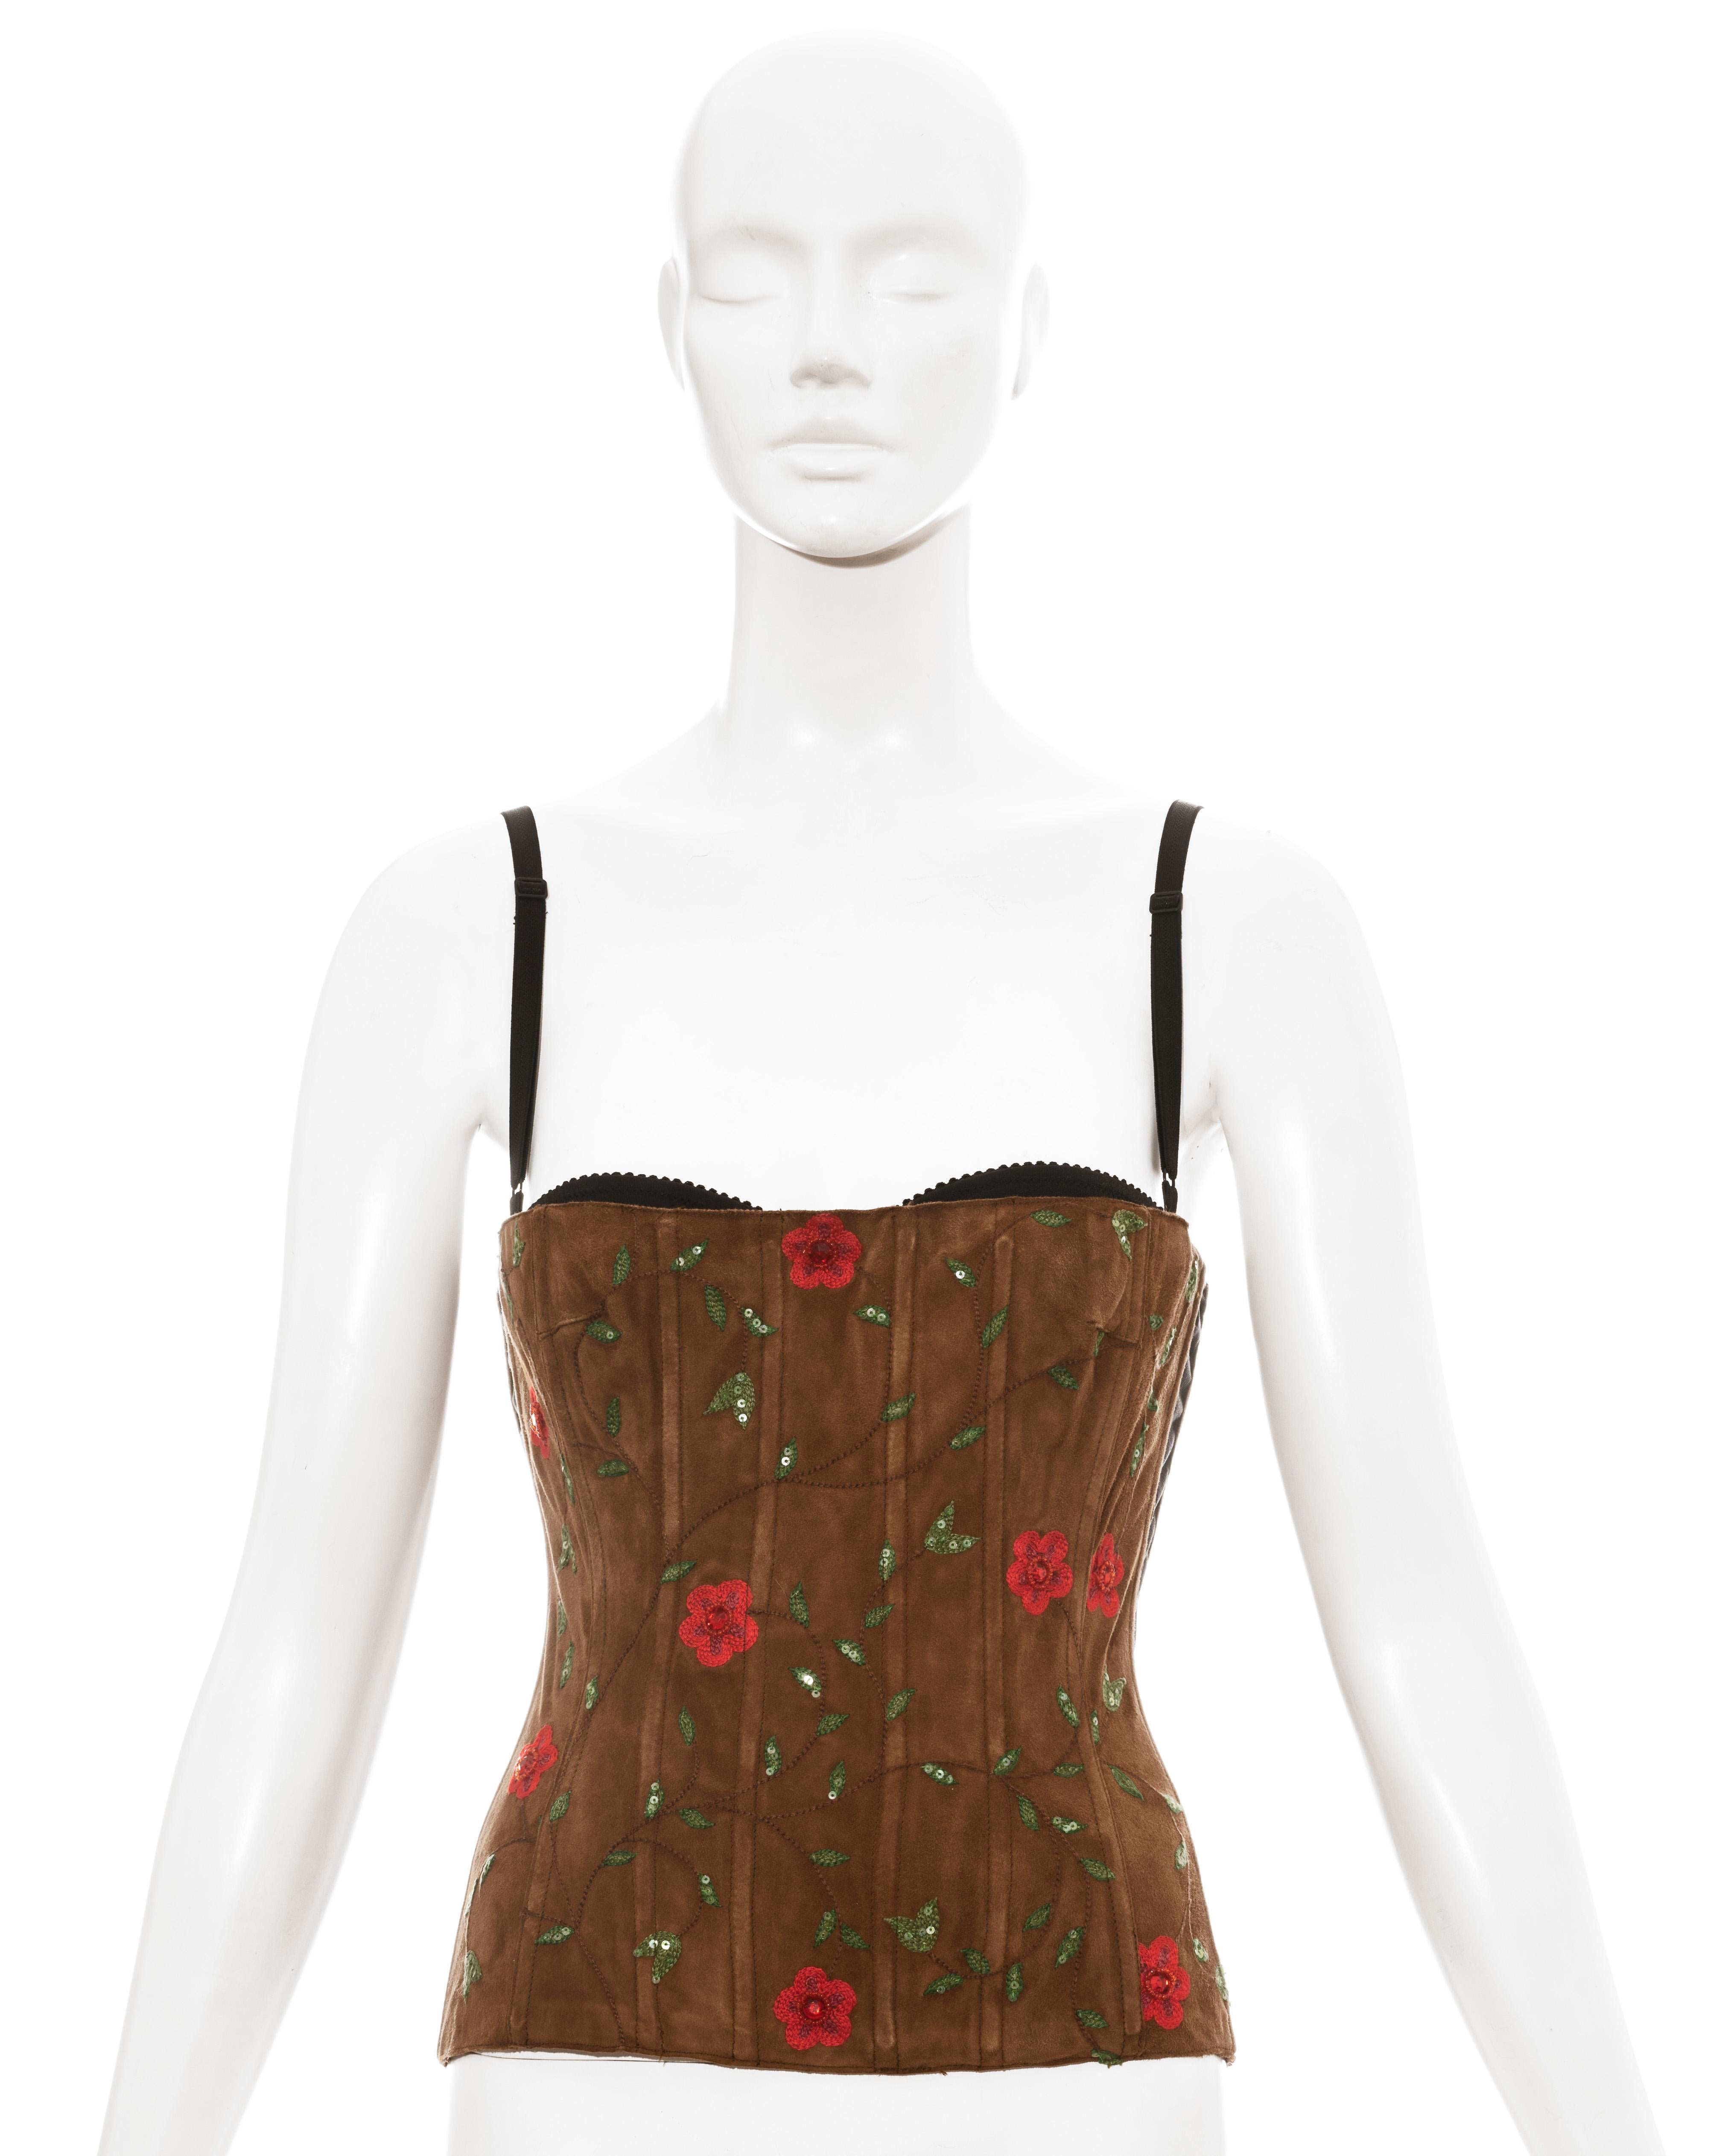 Dolce & Gabbana brown suede corset with floral embroidery and embellishment.

c. 1990s